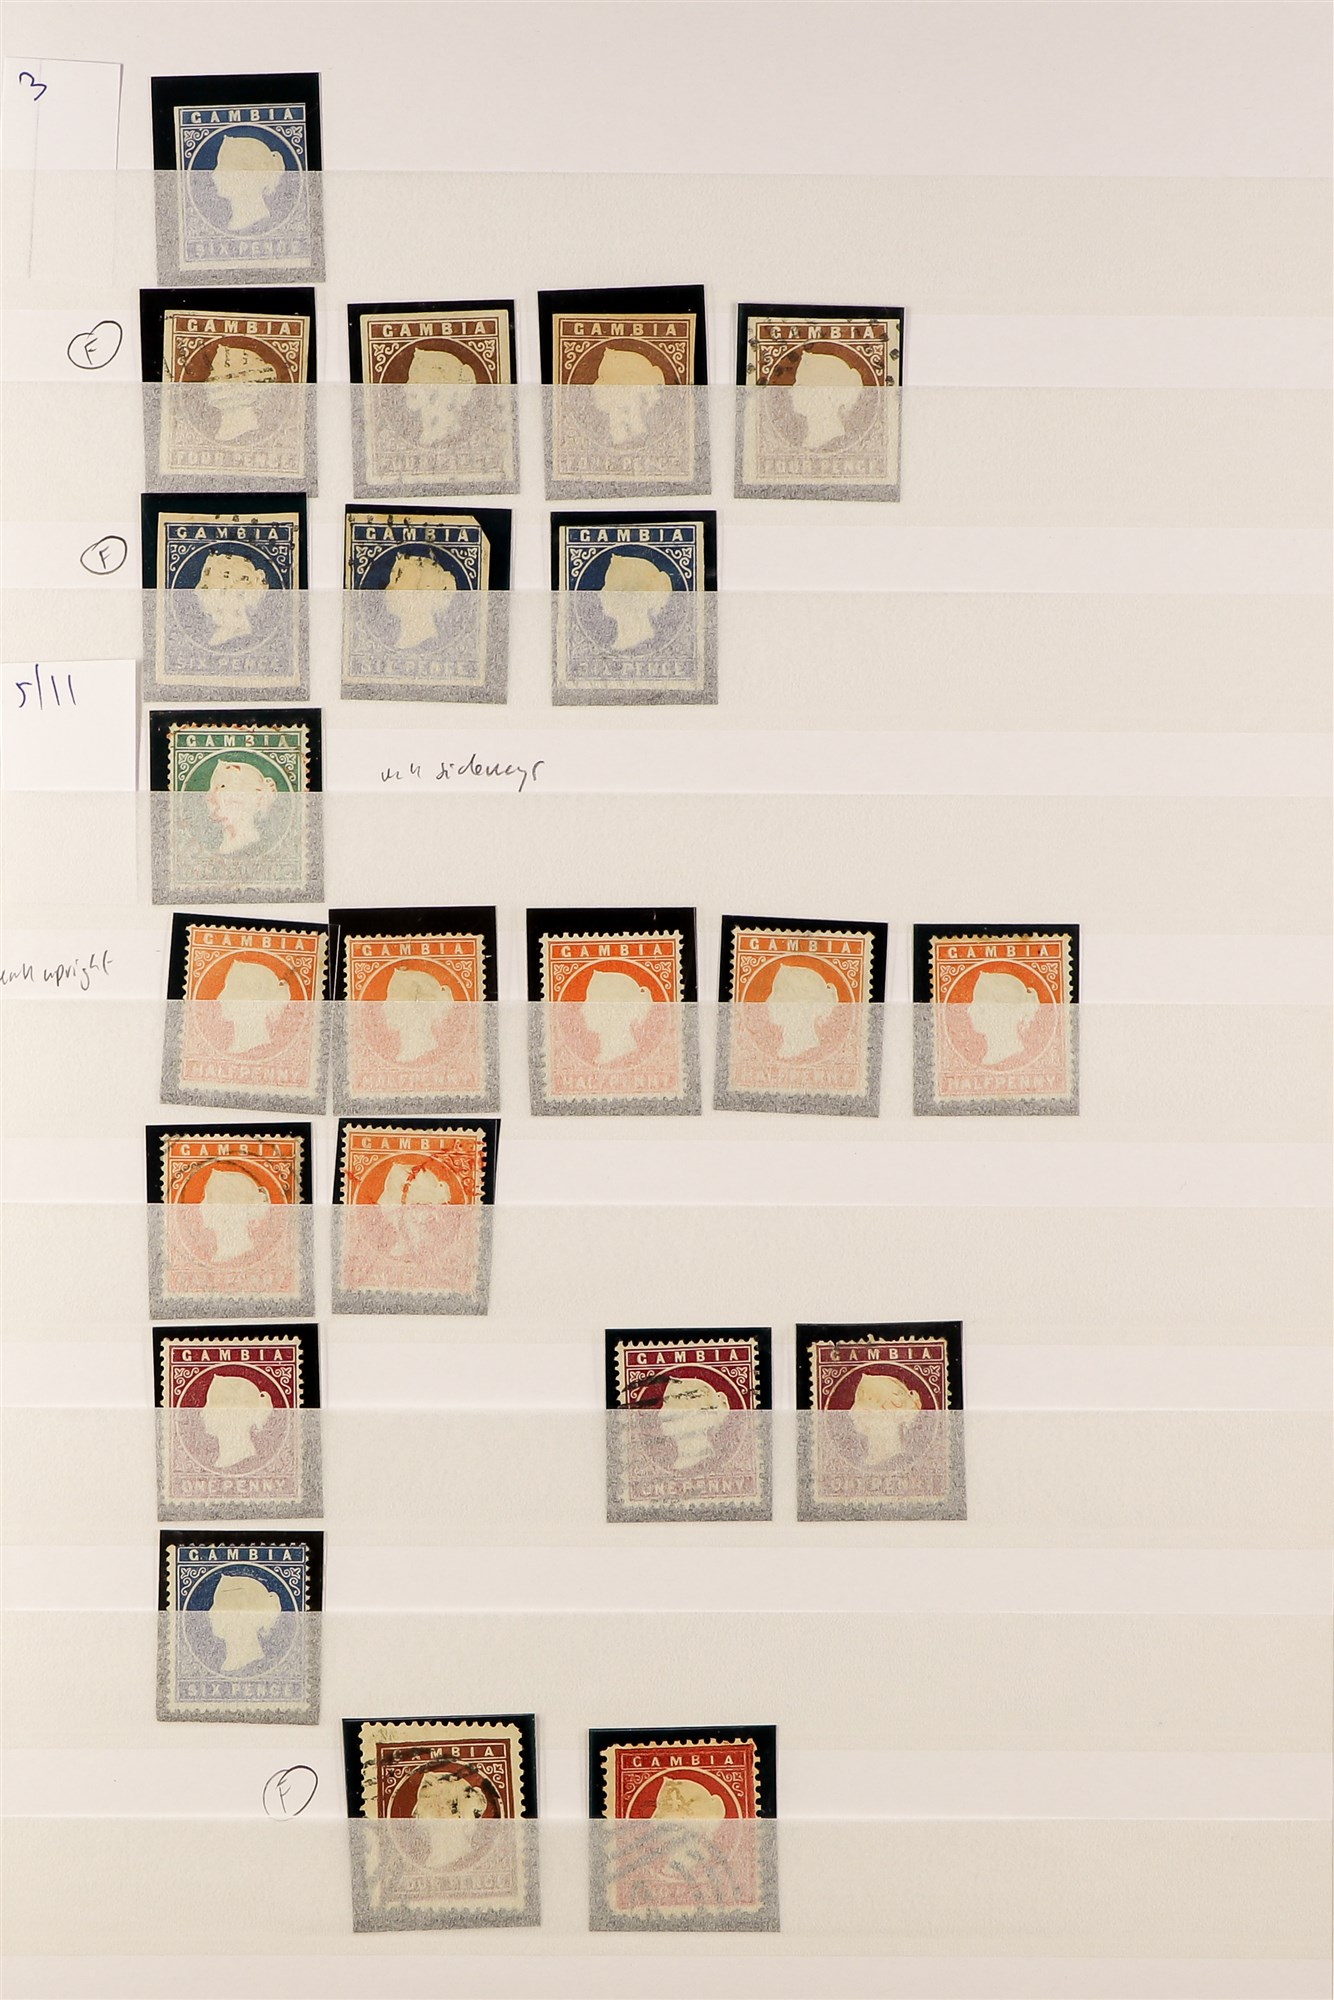 GAMBIA 1869 - 1898 COLLECTION of over 85 mint & used stamps on protective pages, note 1869-72 6d